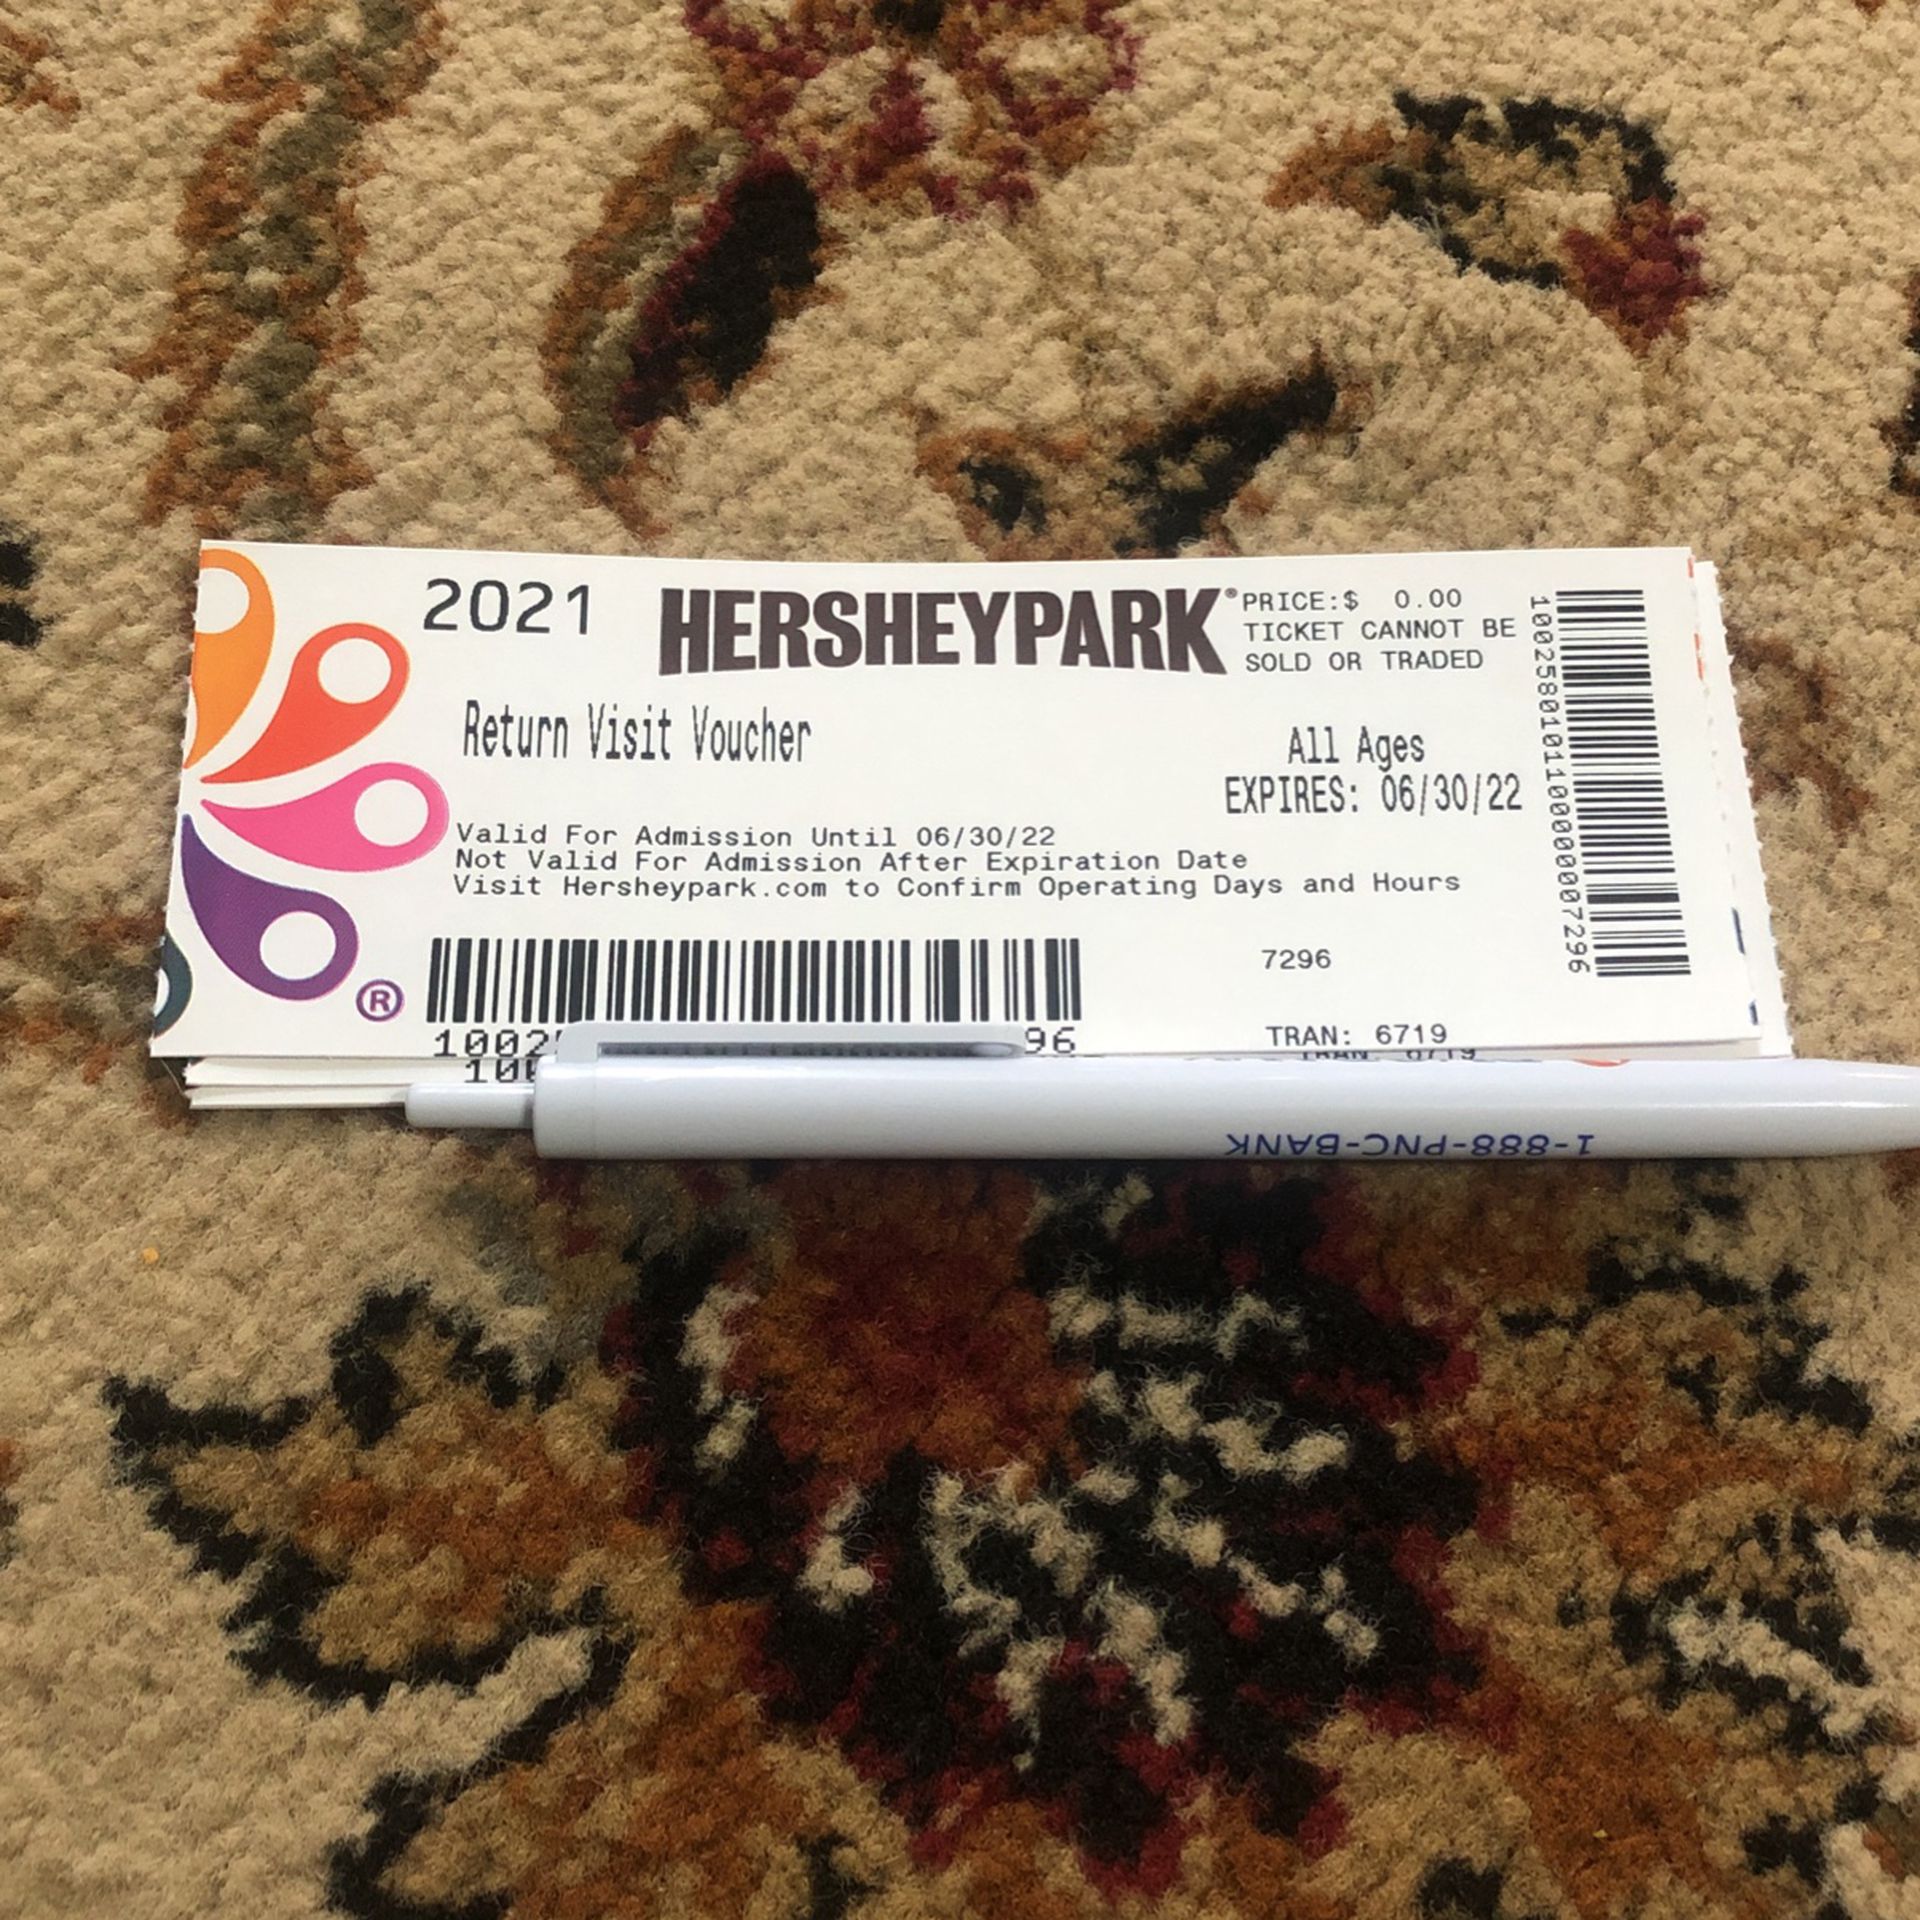 Hersheypark tickets for sale